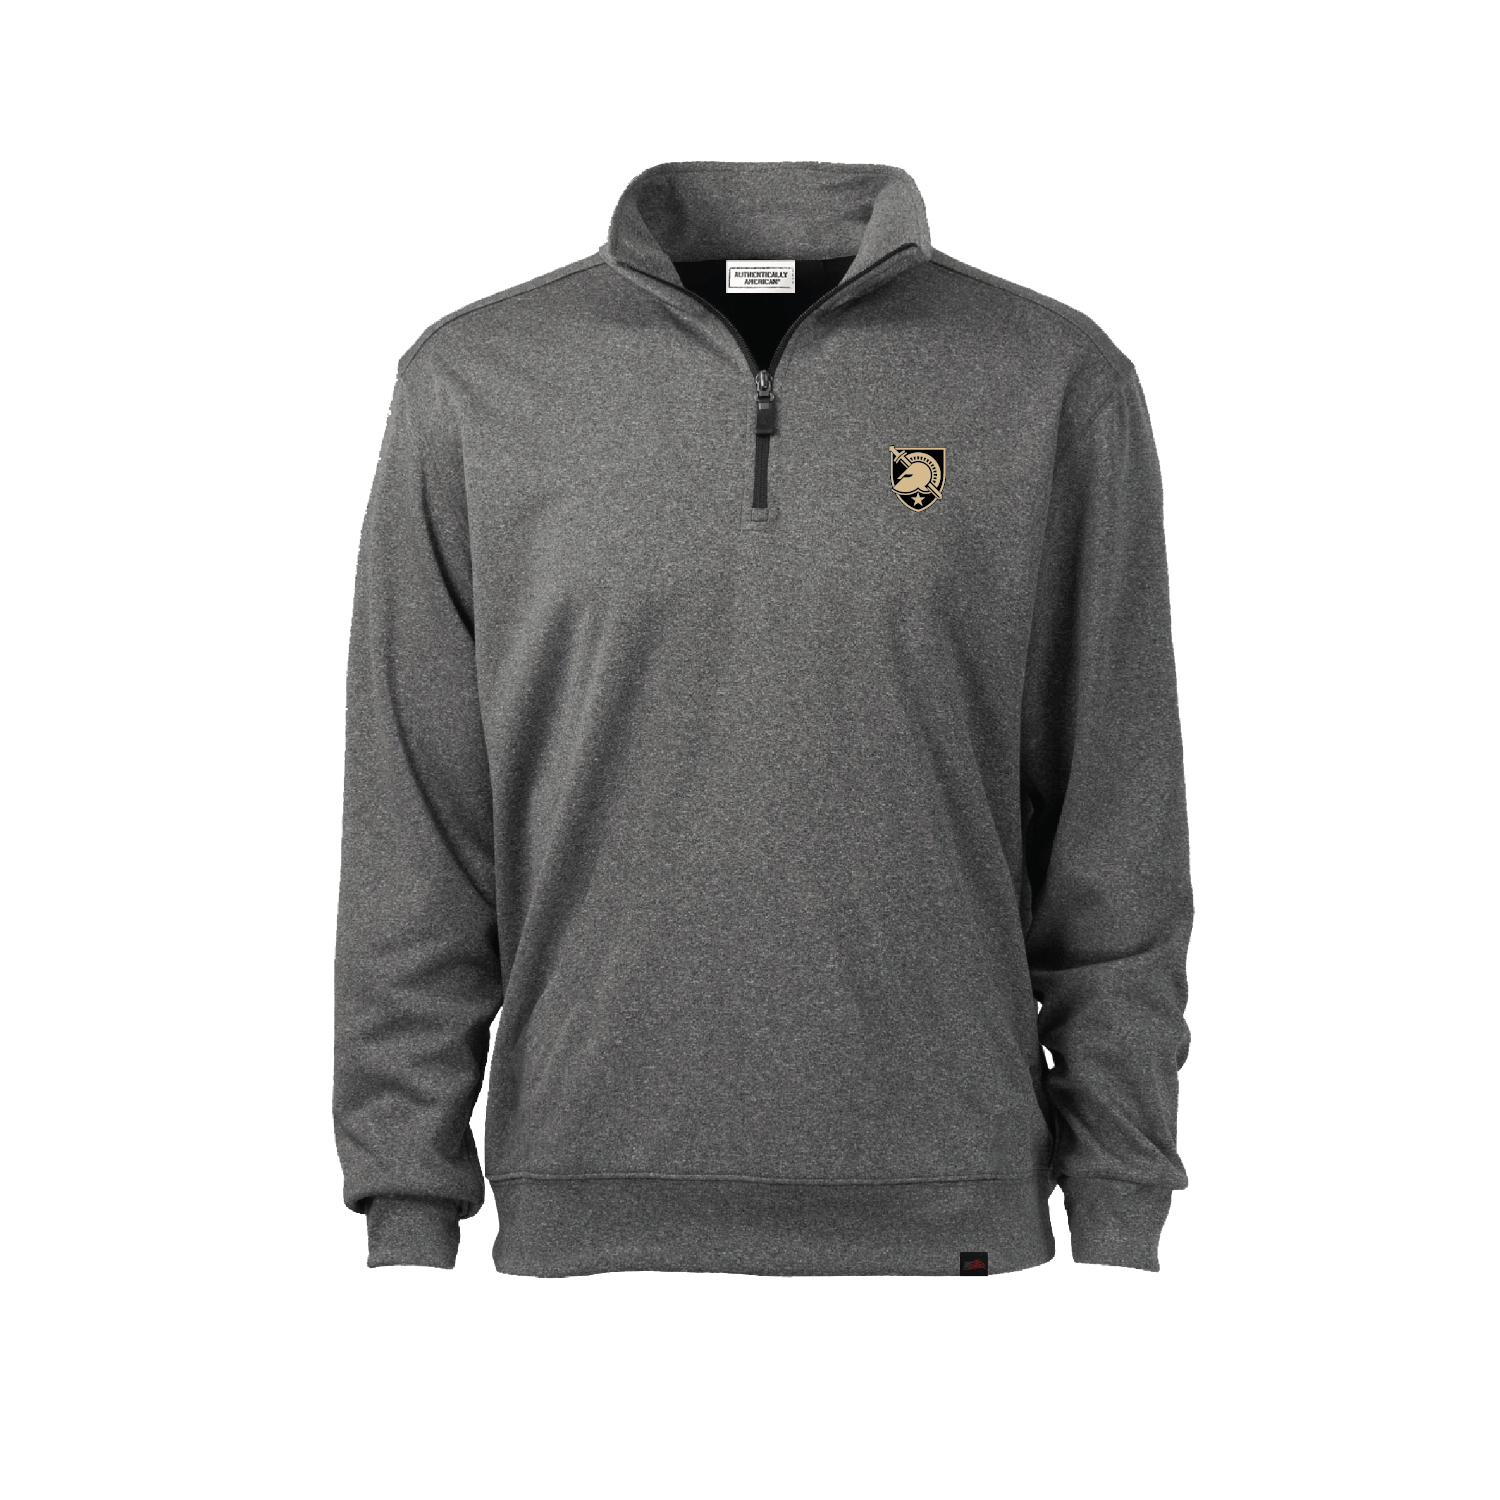 Authentically American - Army WP Performance Qtr Zip